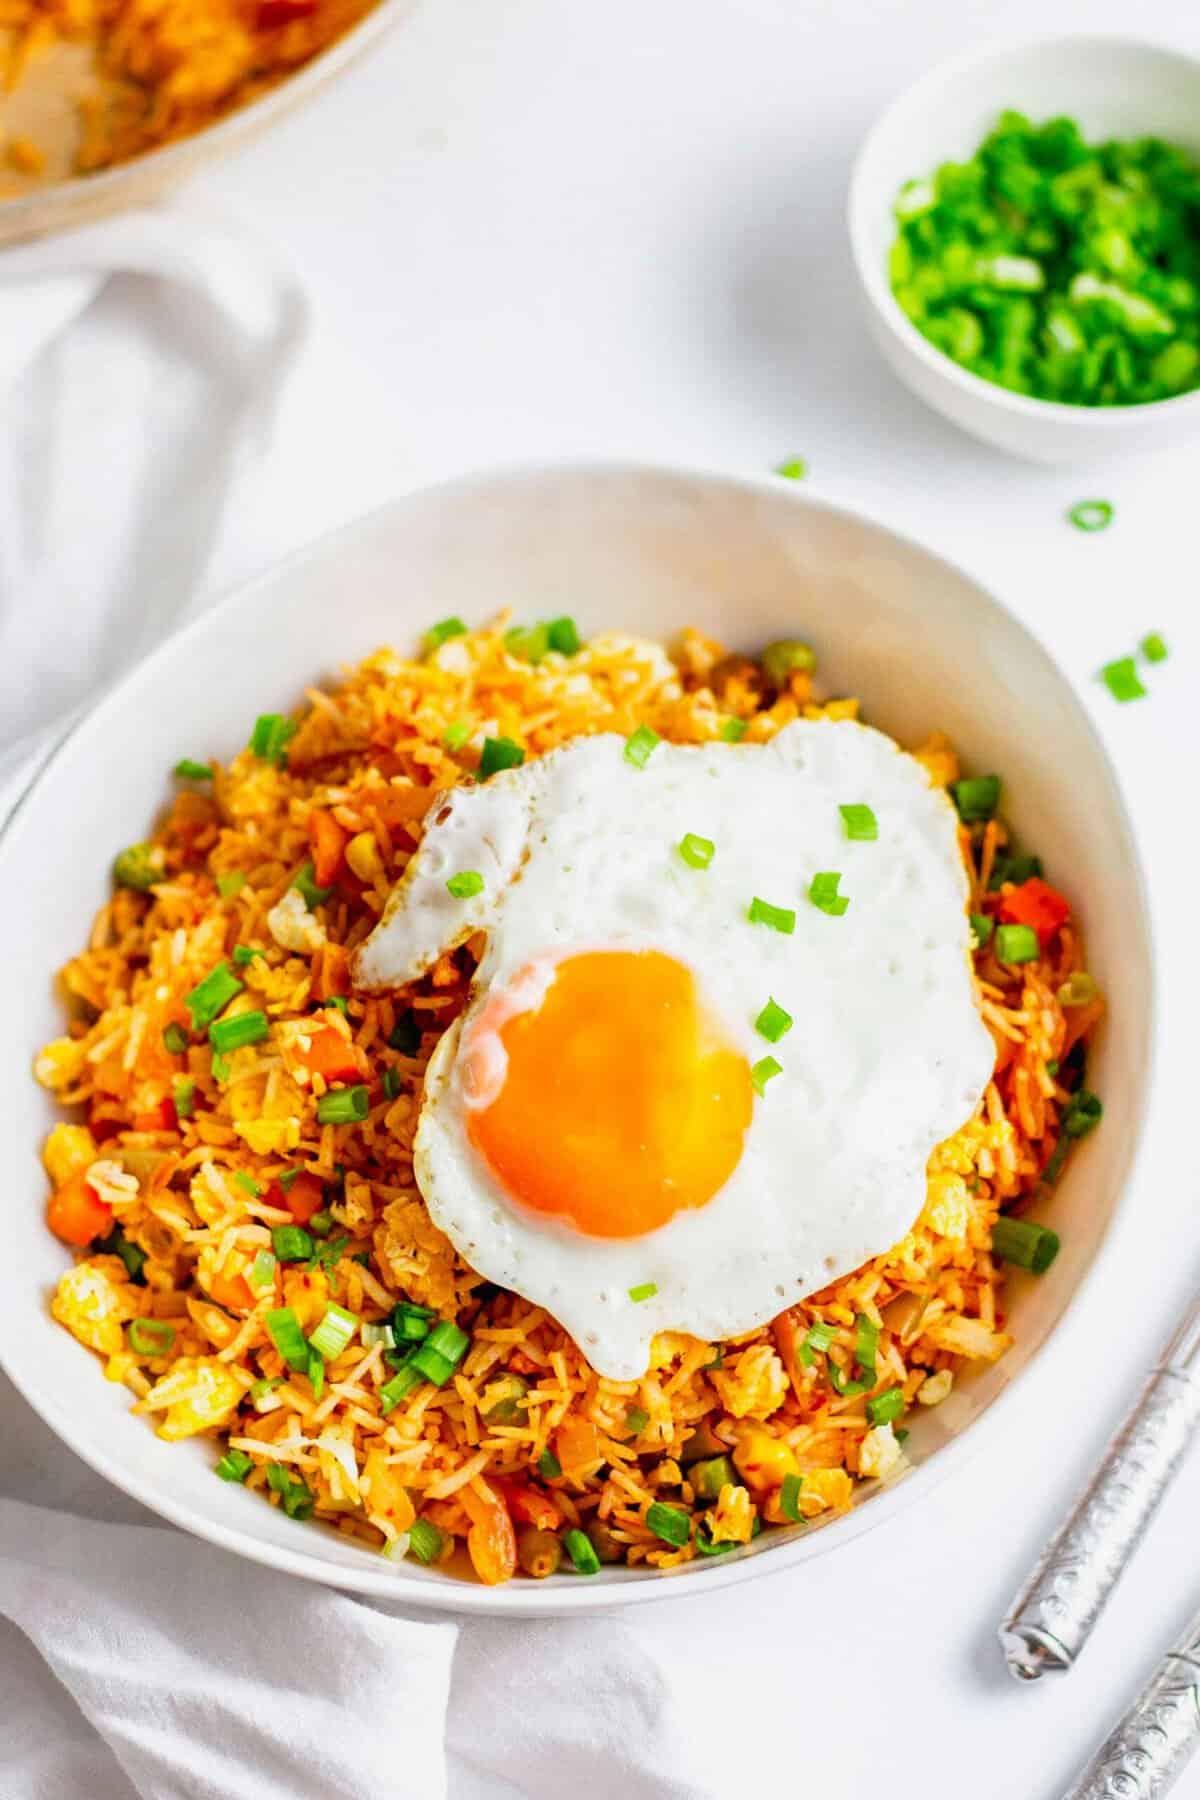 Kimchi fried rice topped with fried egg and garnished with green onions